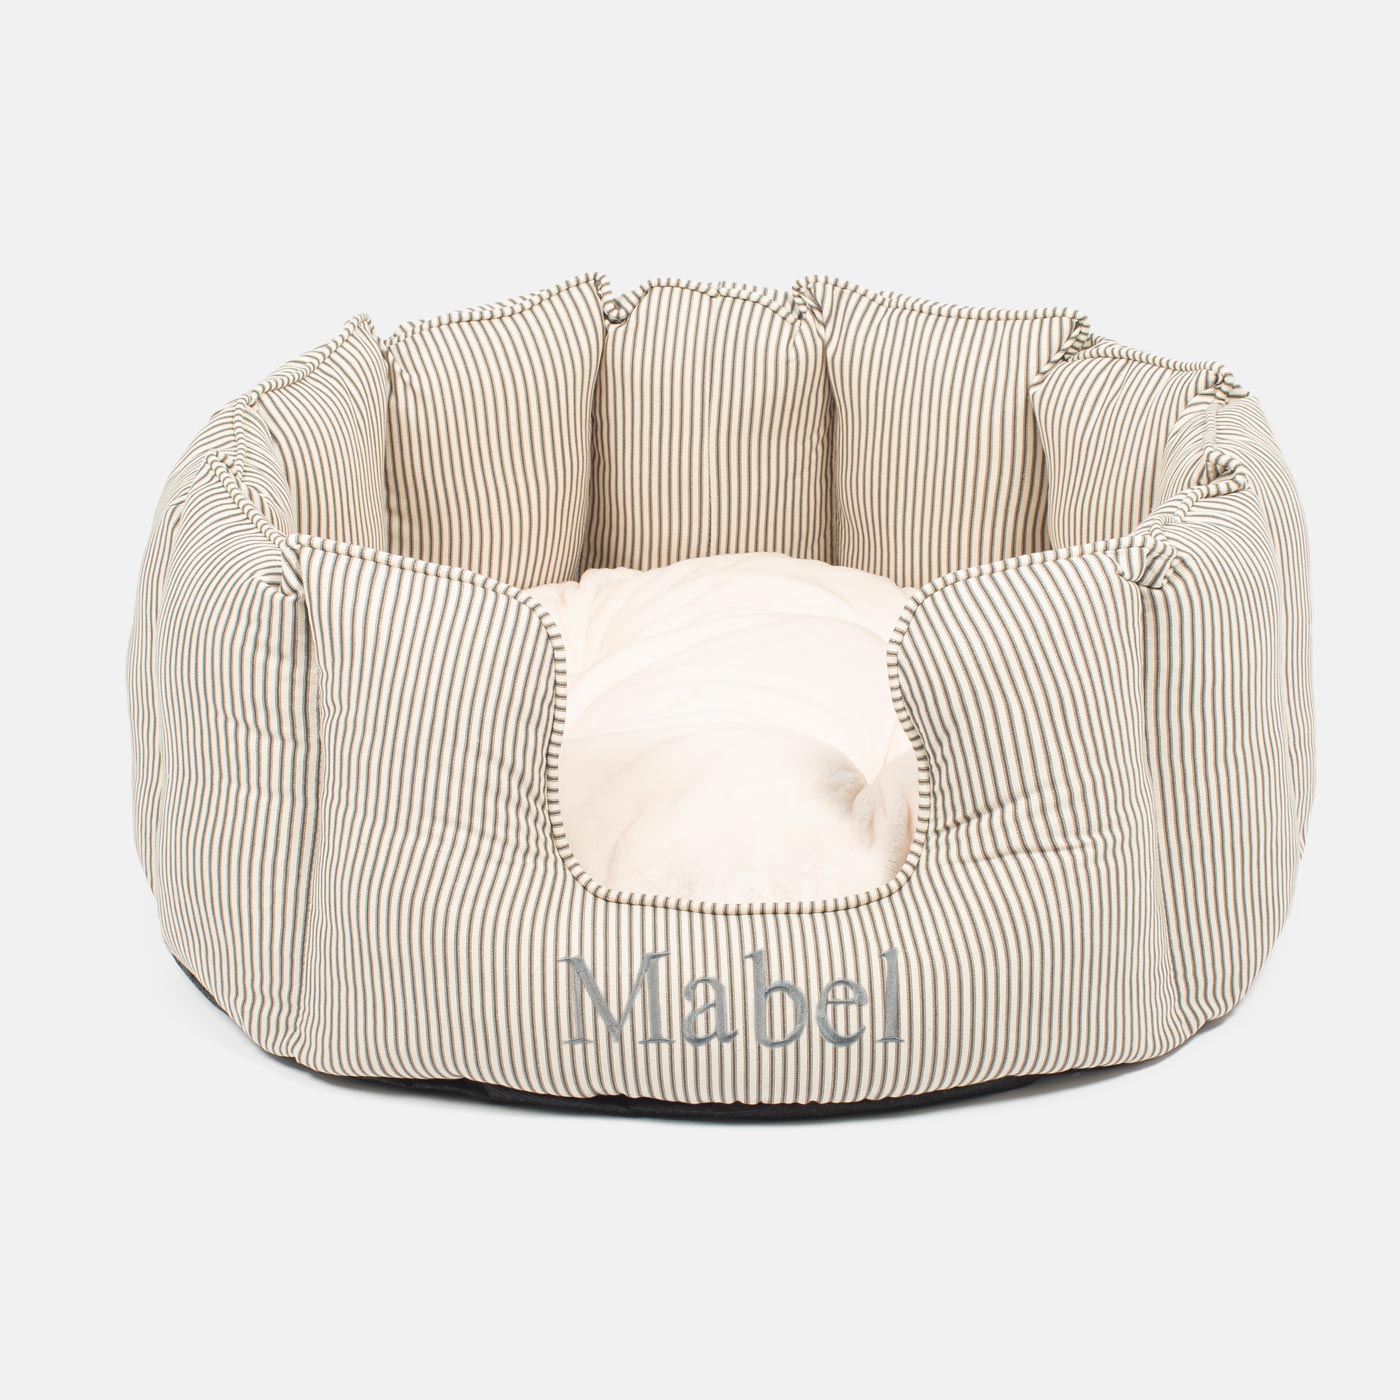 Discover Our Luxurious High Wall Bed For Cats & Kittens, Featuring Reversible Inner Cushion With Teddy Fleece To Craft The Perfect Cat Bed In Stunning Regency Stripe! Available To Personalize Now at Lords & Labradors US